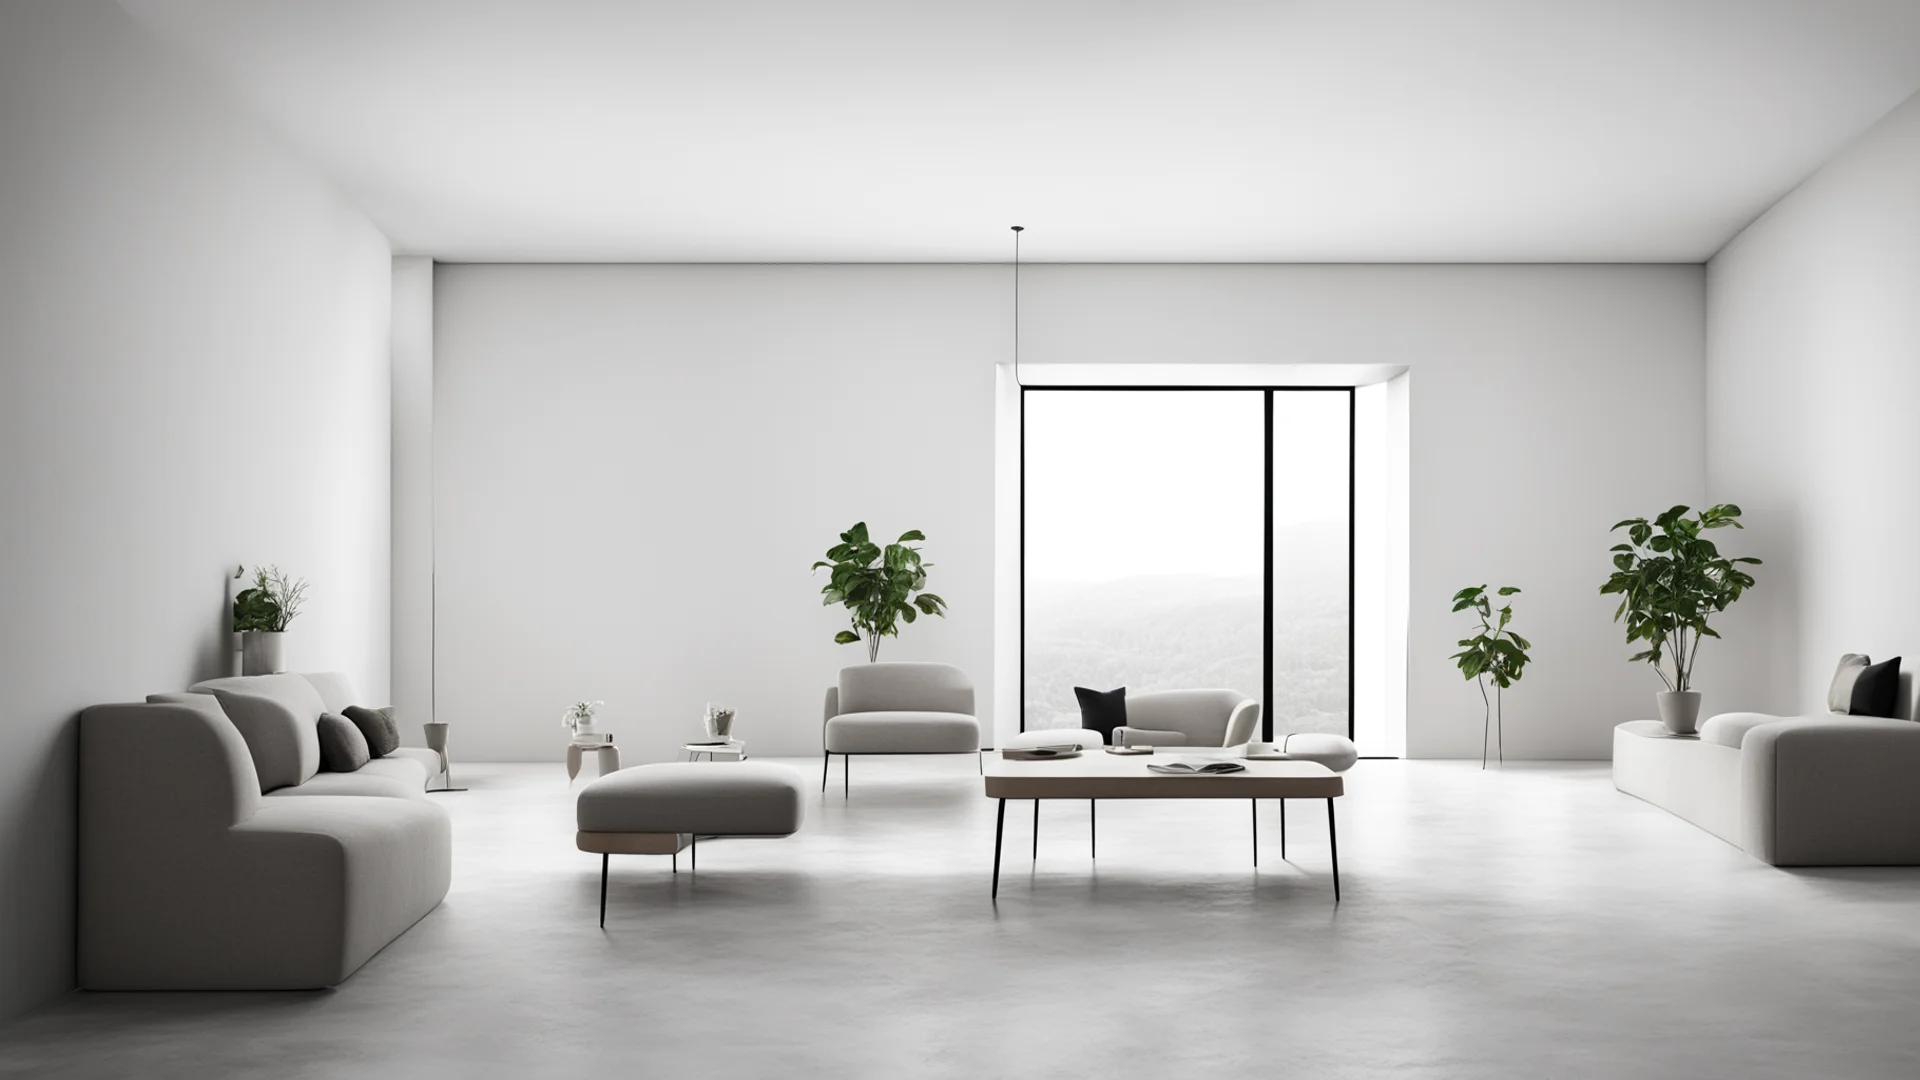  minimal interior space   no chairs  amazing awesome portrait 2 wide